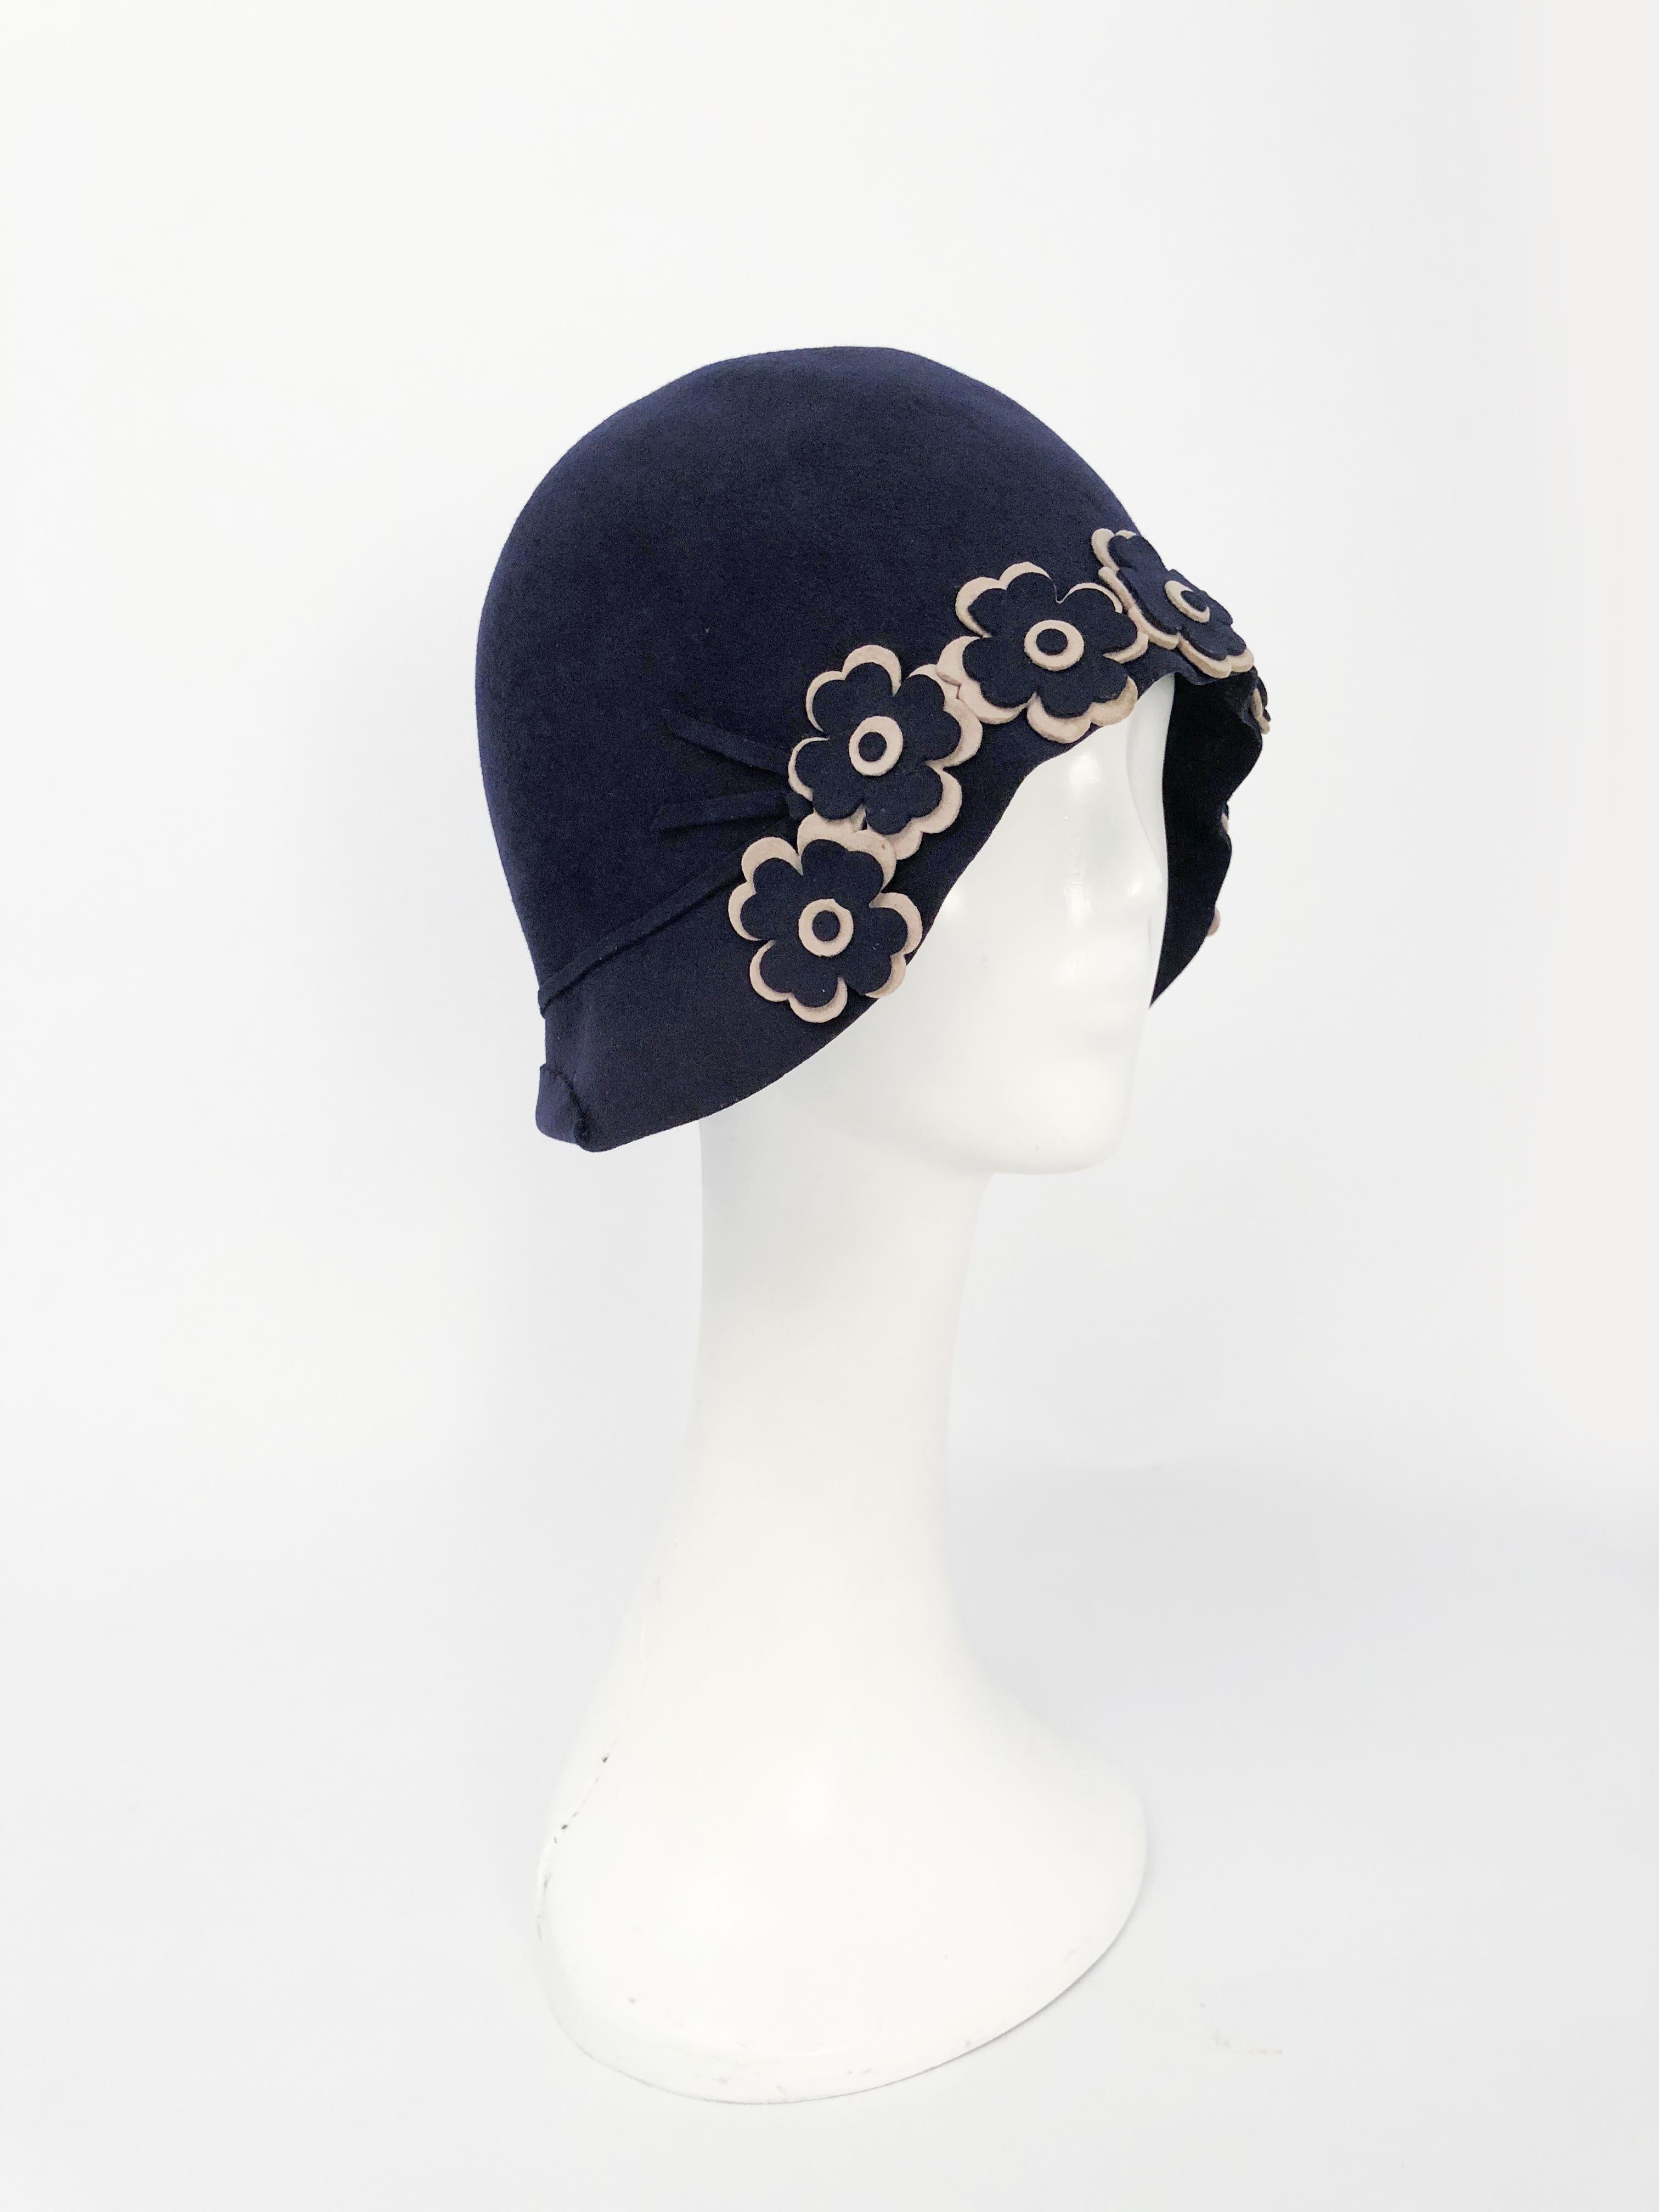 1920s Navy Beaver Felt Cloche with Hand cut Flower Accents. Navy beaver fur felt cloche with hand-cut navy and beige flowers along the brim of the hat. Also has a thin matching hat band that goes all the way around the hat. 